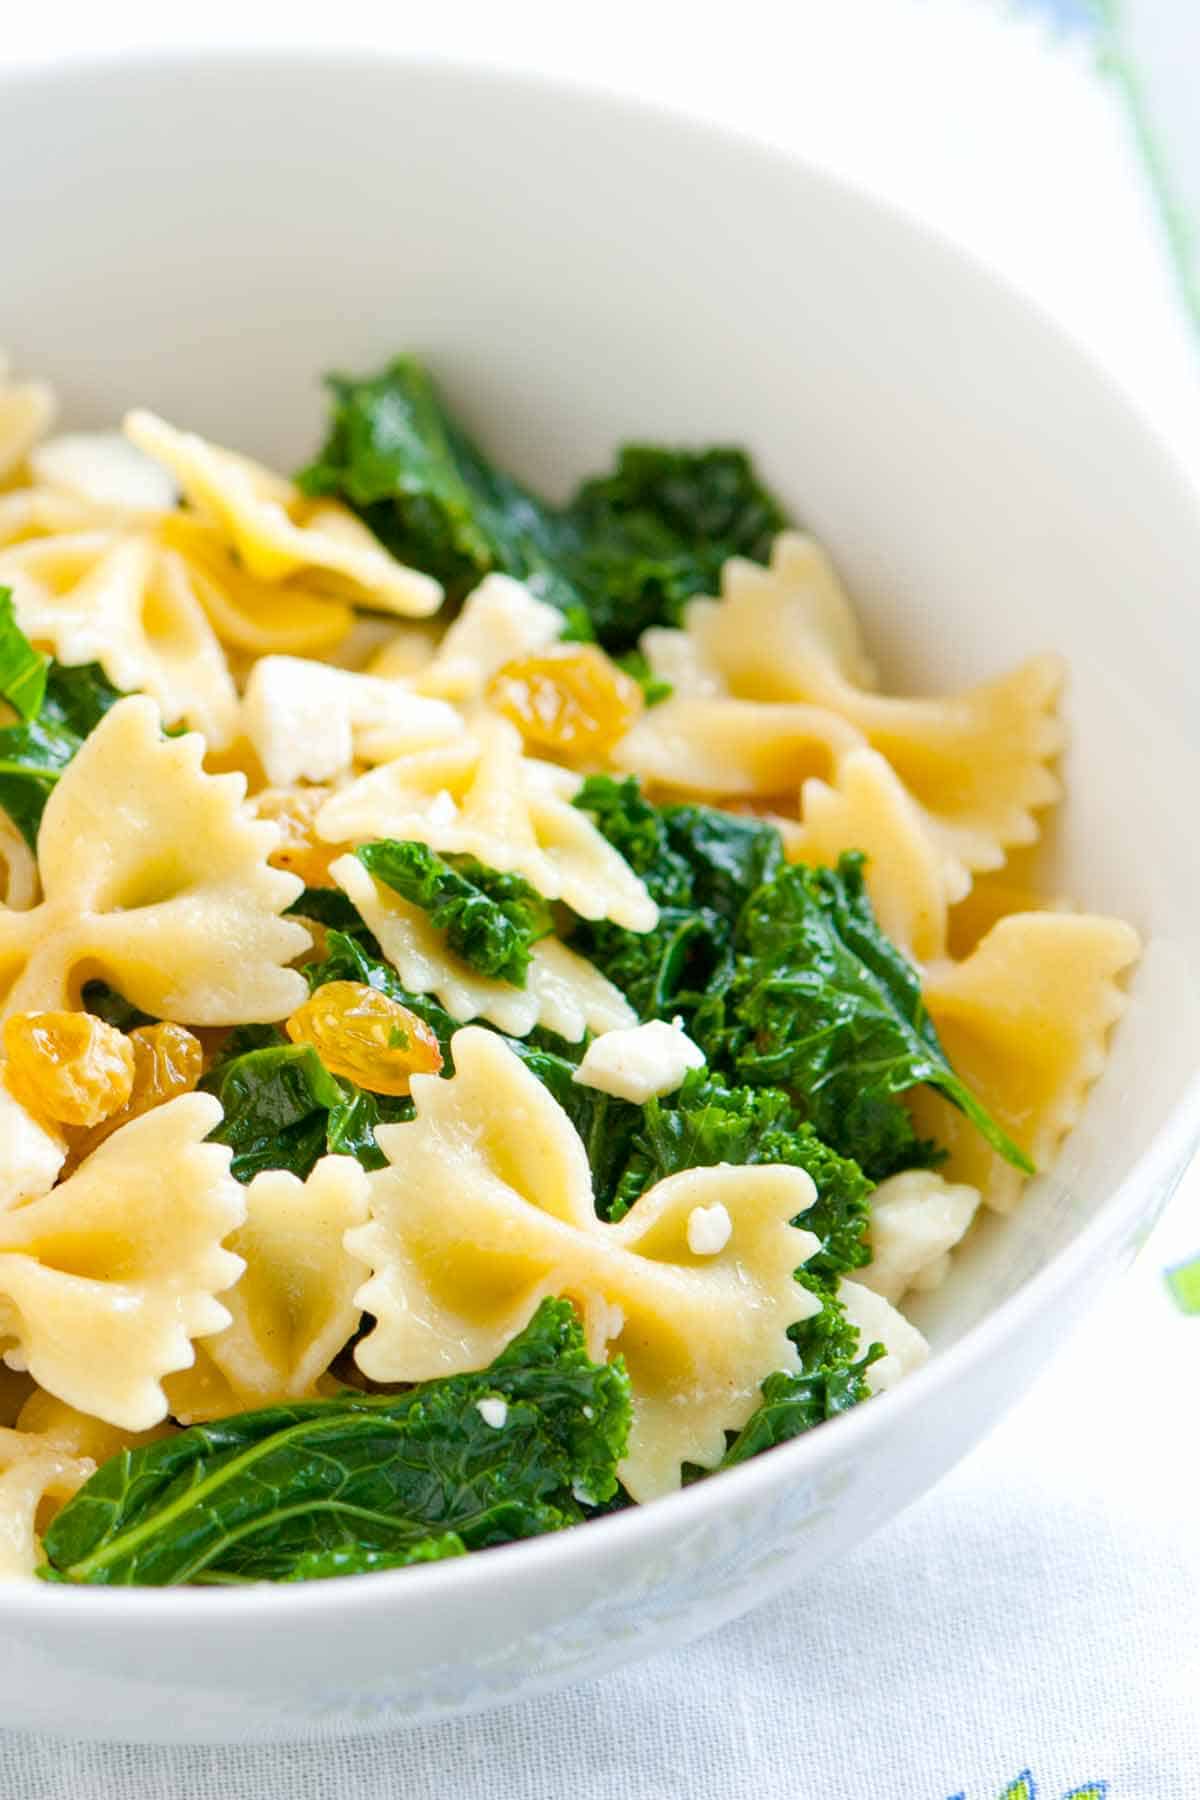 How to Make Easy Kale Pasta with Feta Cheese